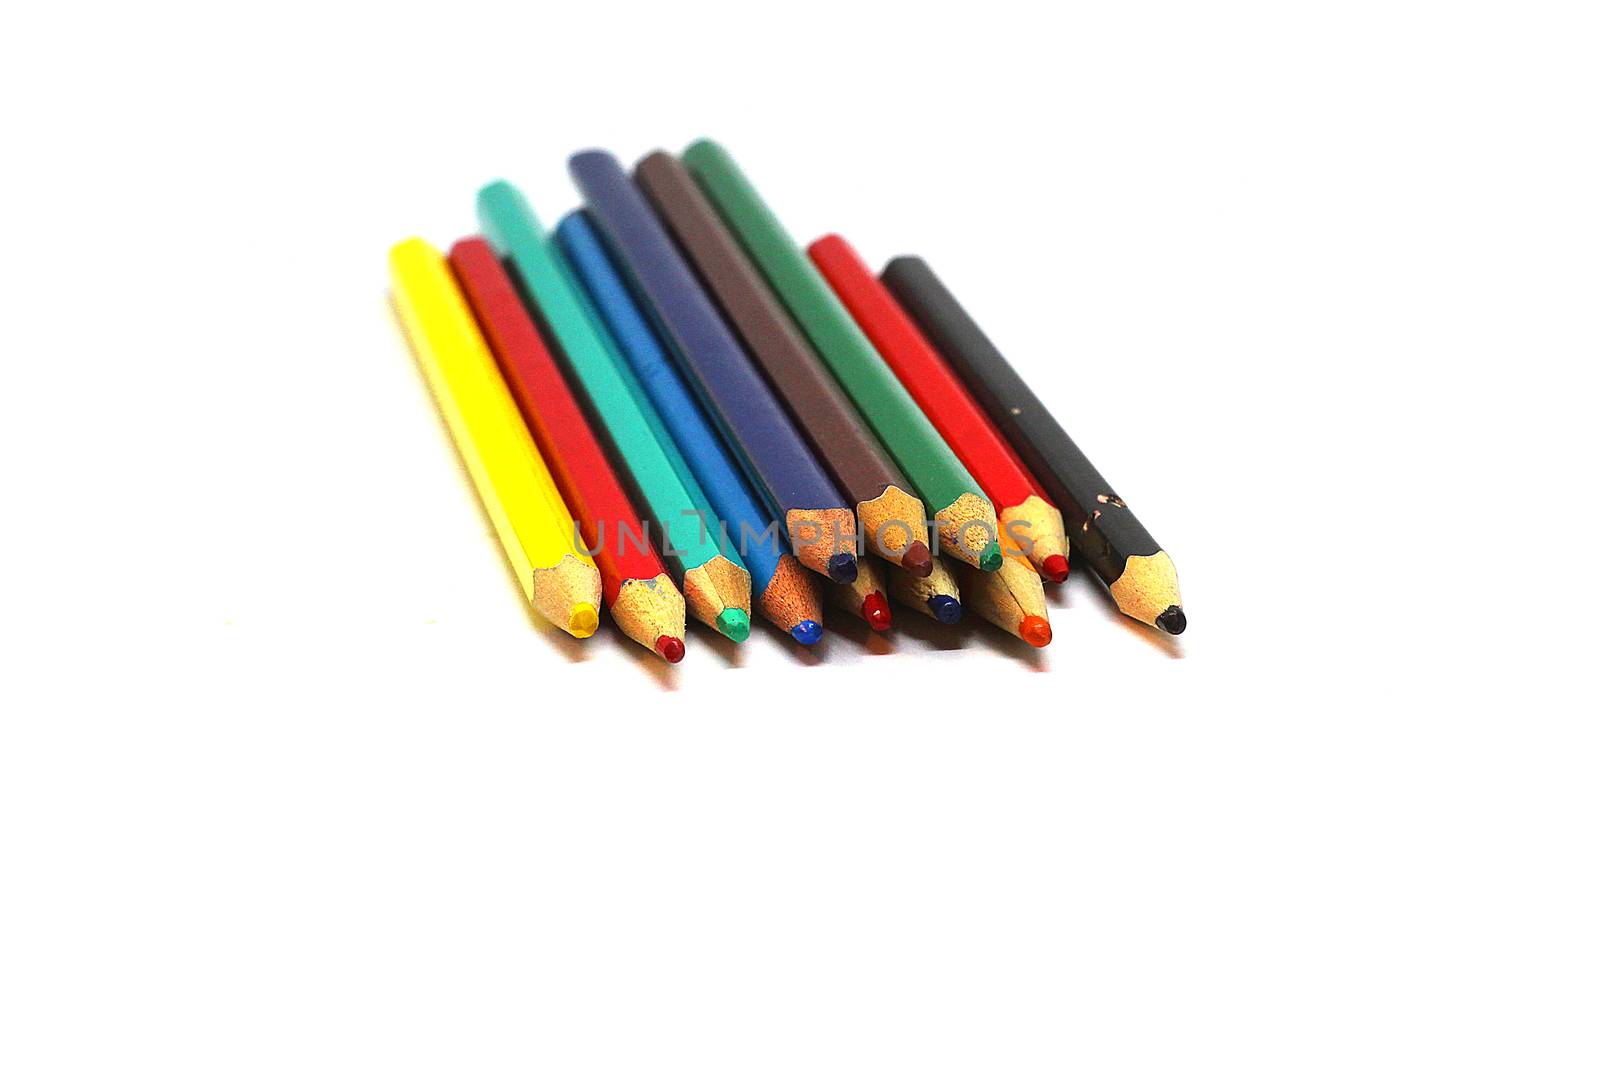 Colorful pencils isolated on white background.